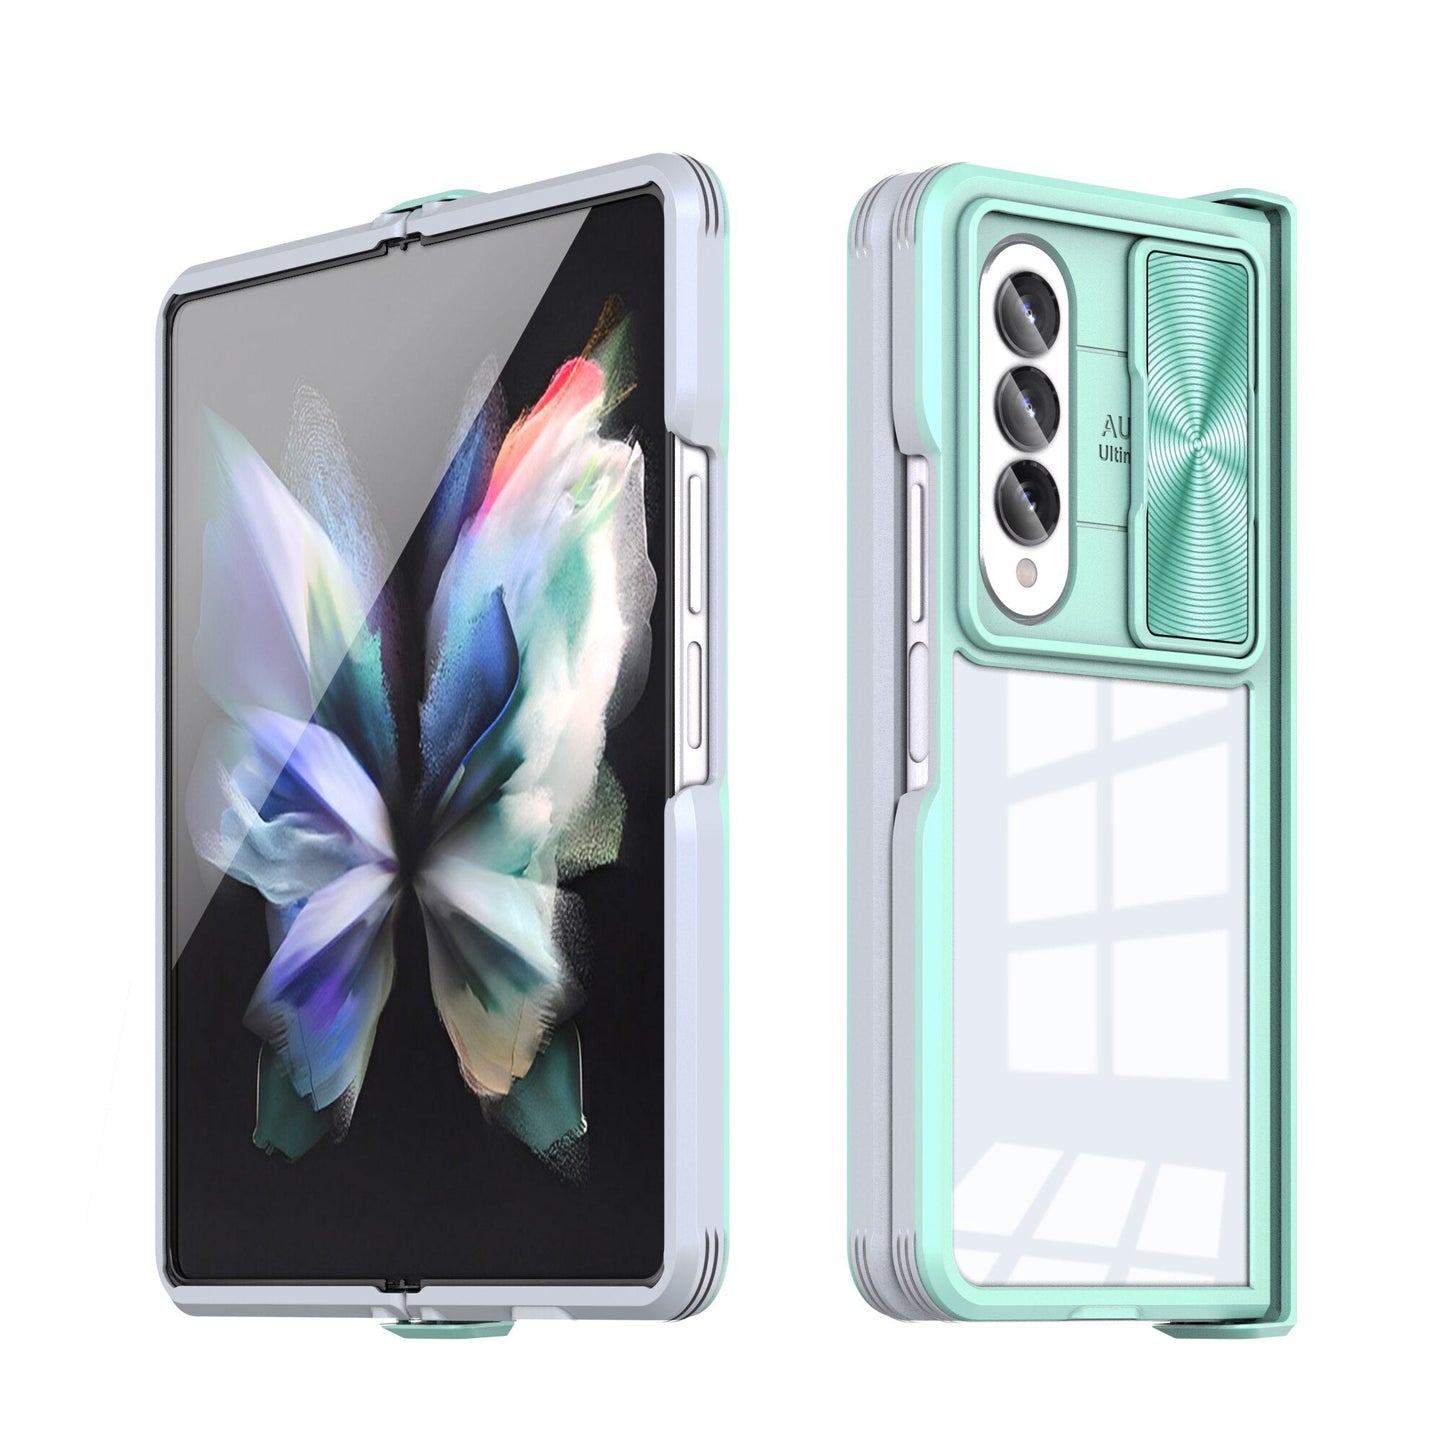 ANTI-DROP CLEAR CASE SLIDE CAMERA PROTECTION FOR SAMSUNG GALAXY Z FOLD 4